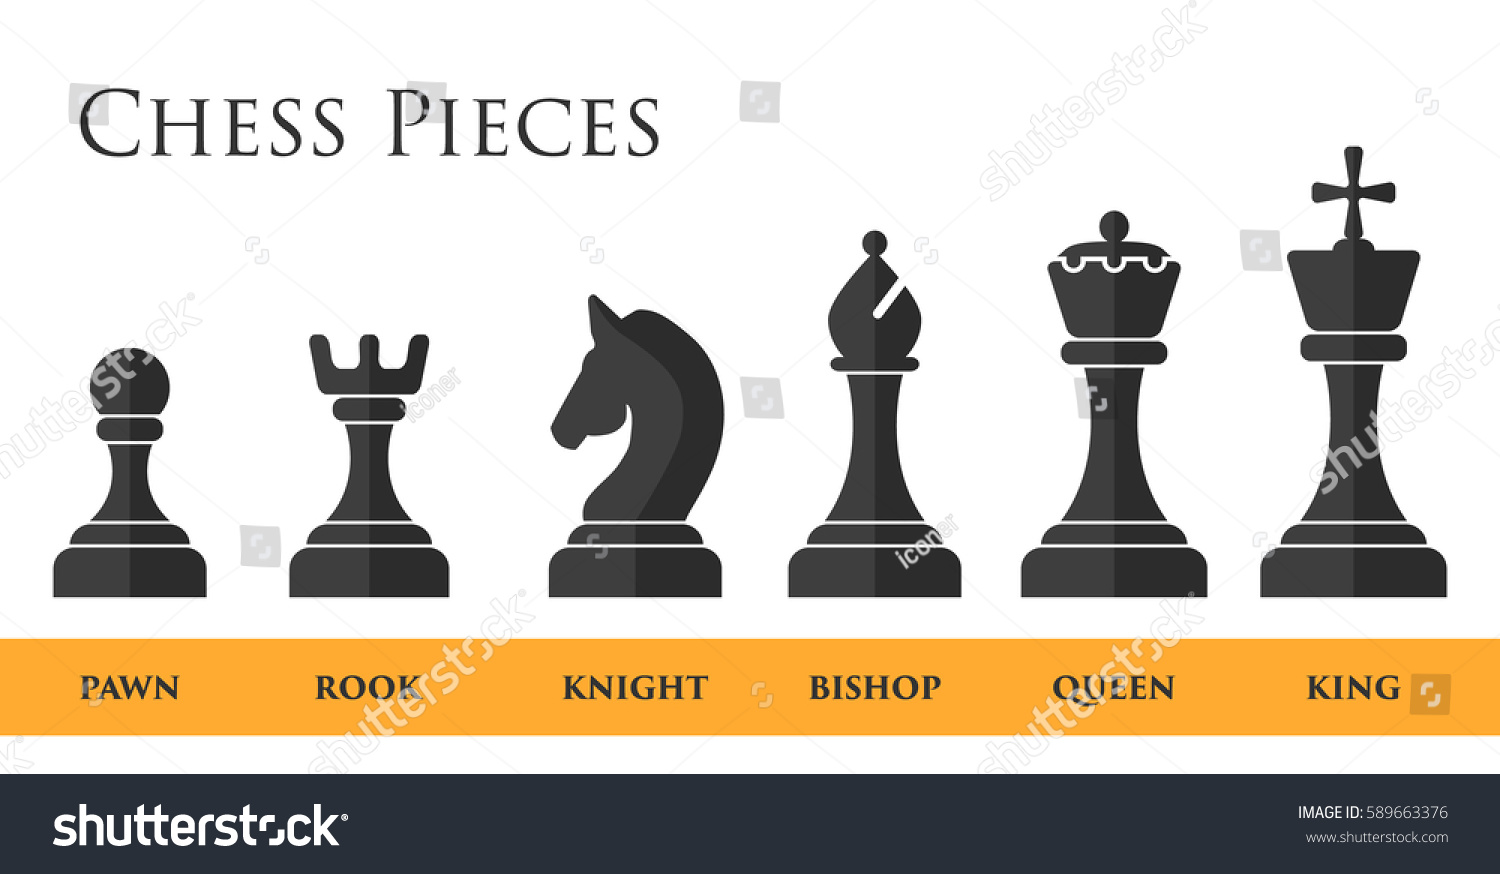 Image result for chess board with pieces names